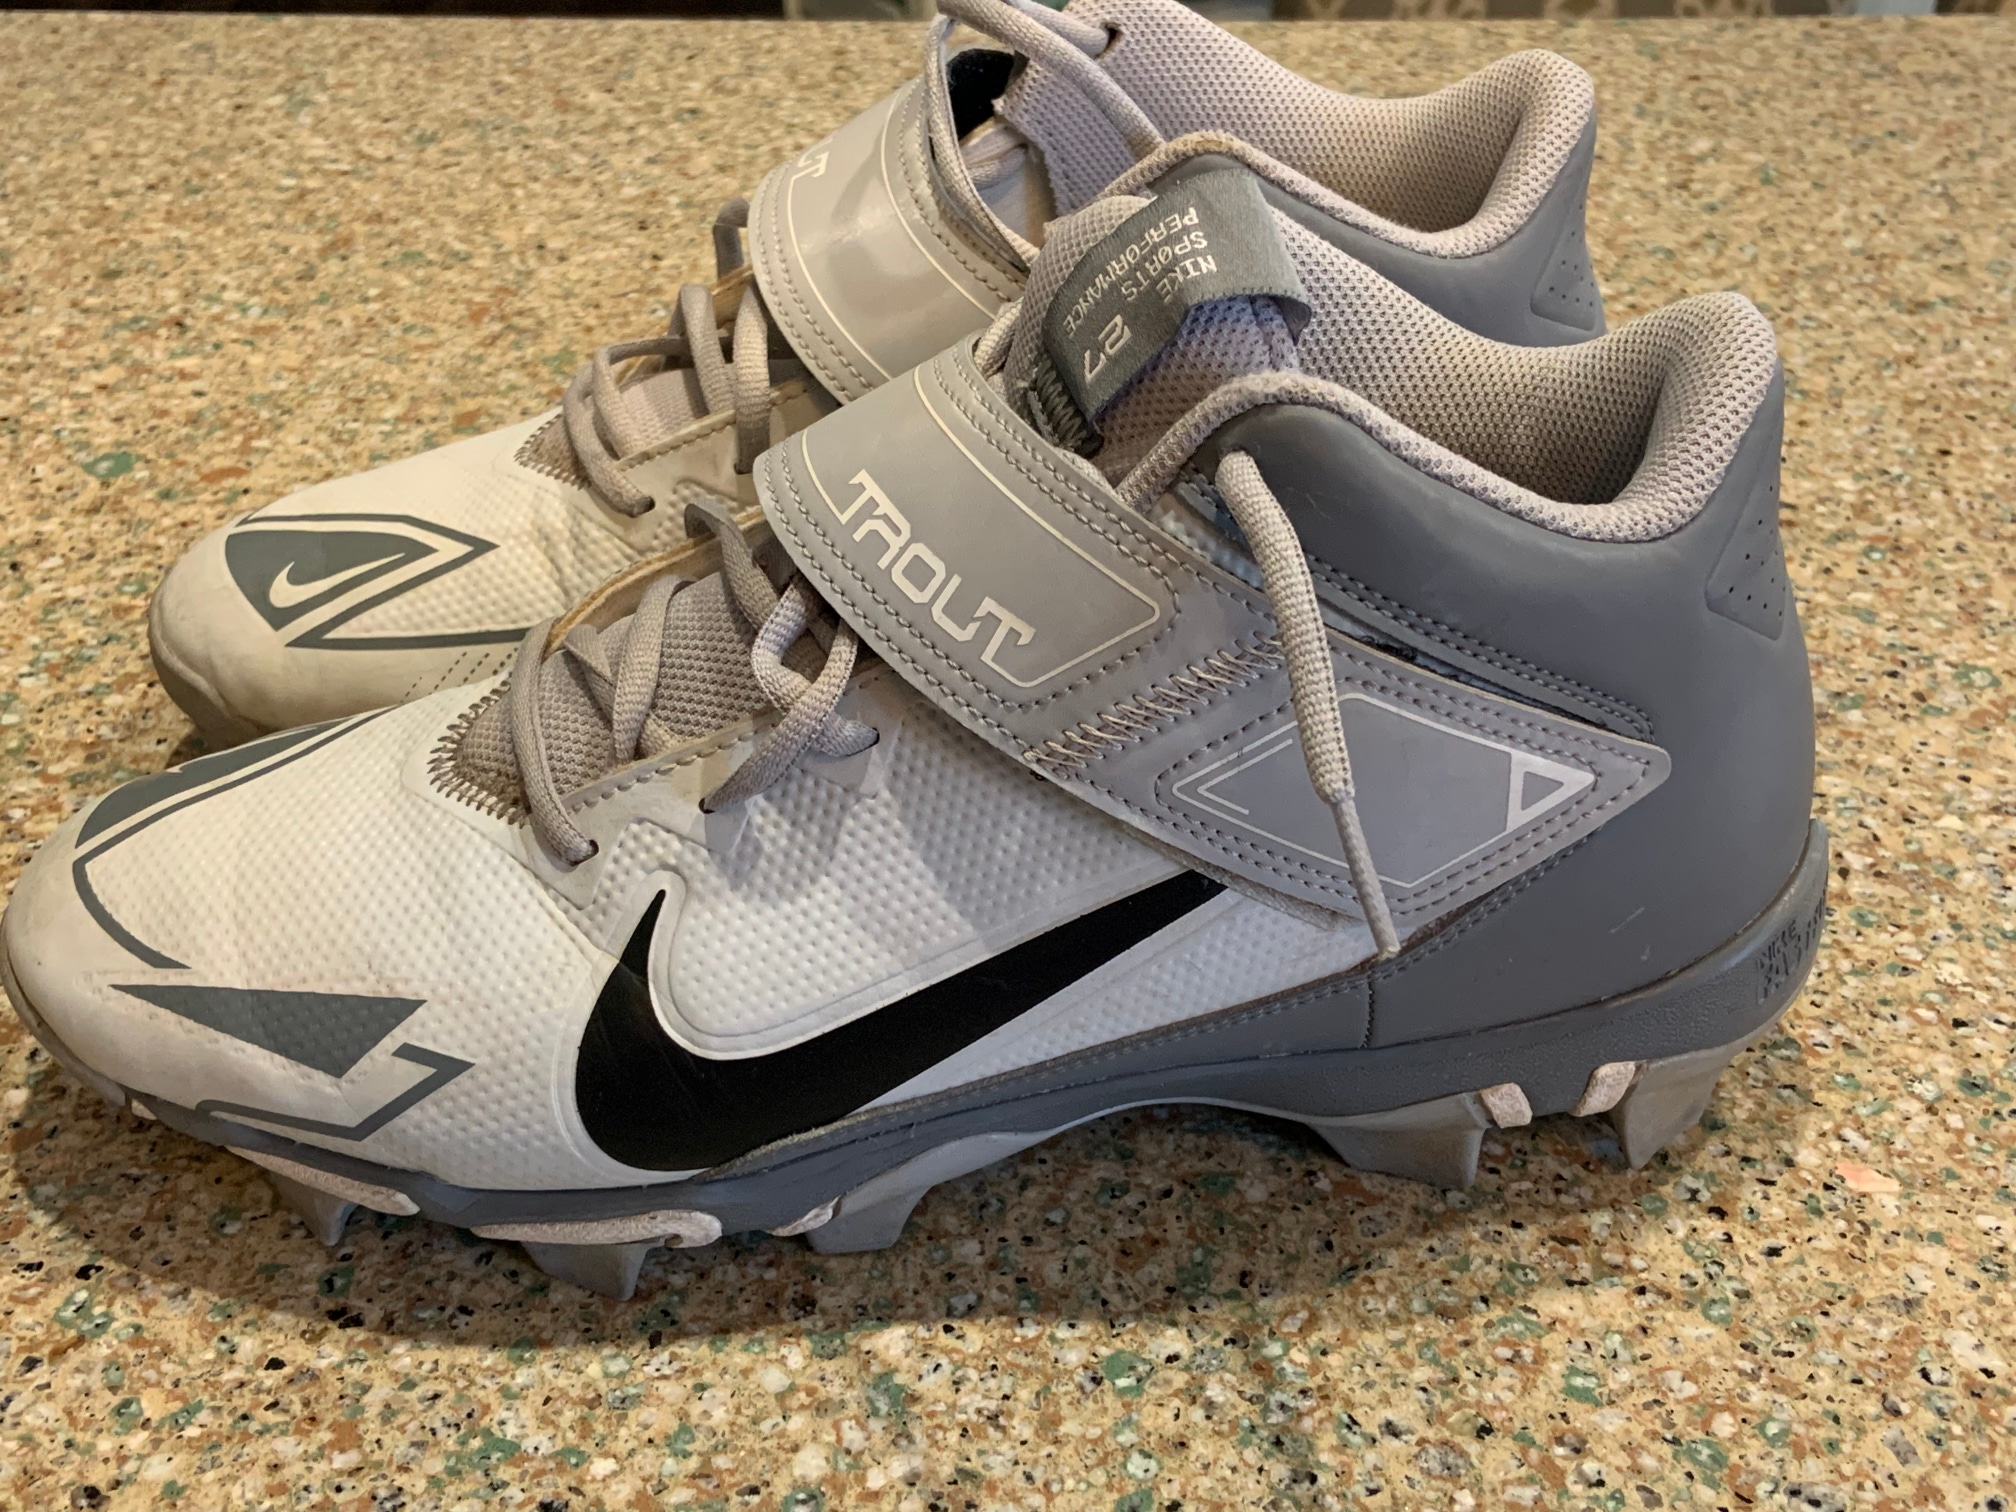 Nike Men’s Trout Baseball Molded/Plastic Cleats/Spikes - Size 10